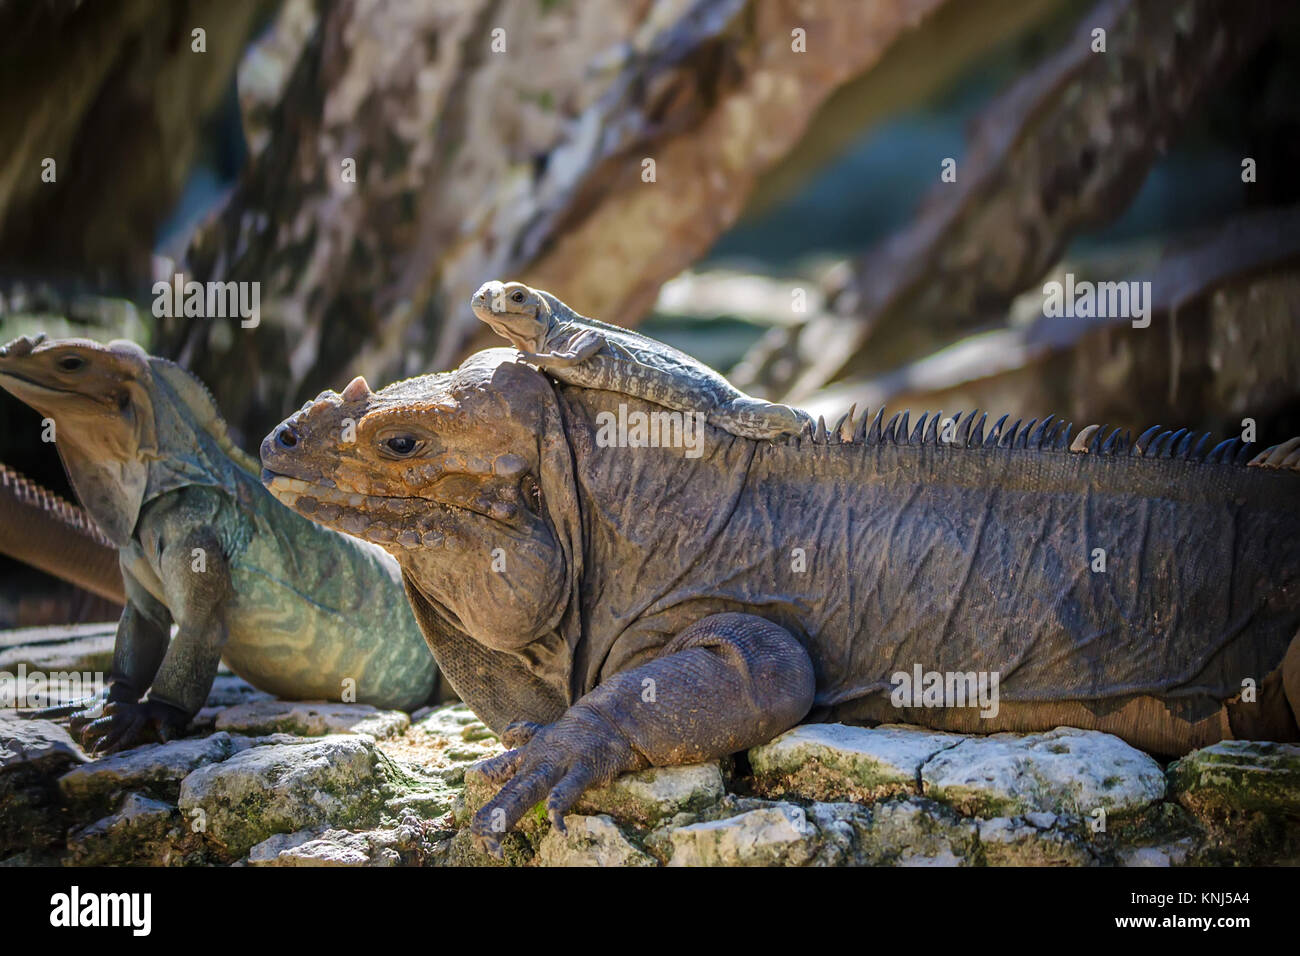 Baby green iguana lies on its mother Stock Photo